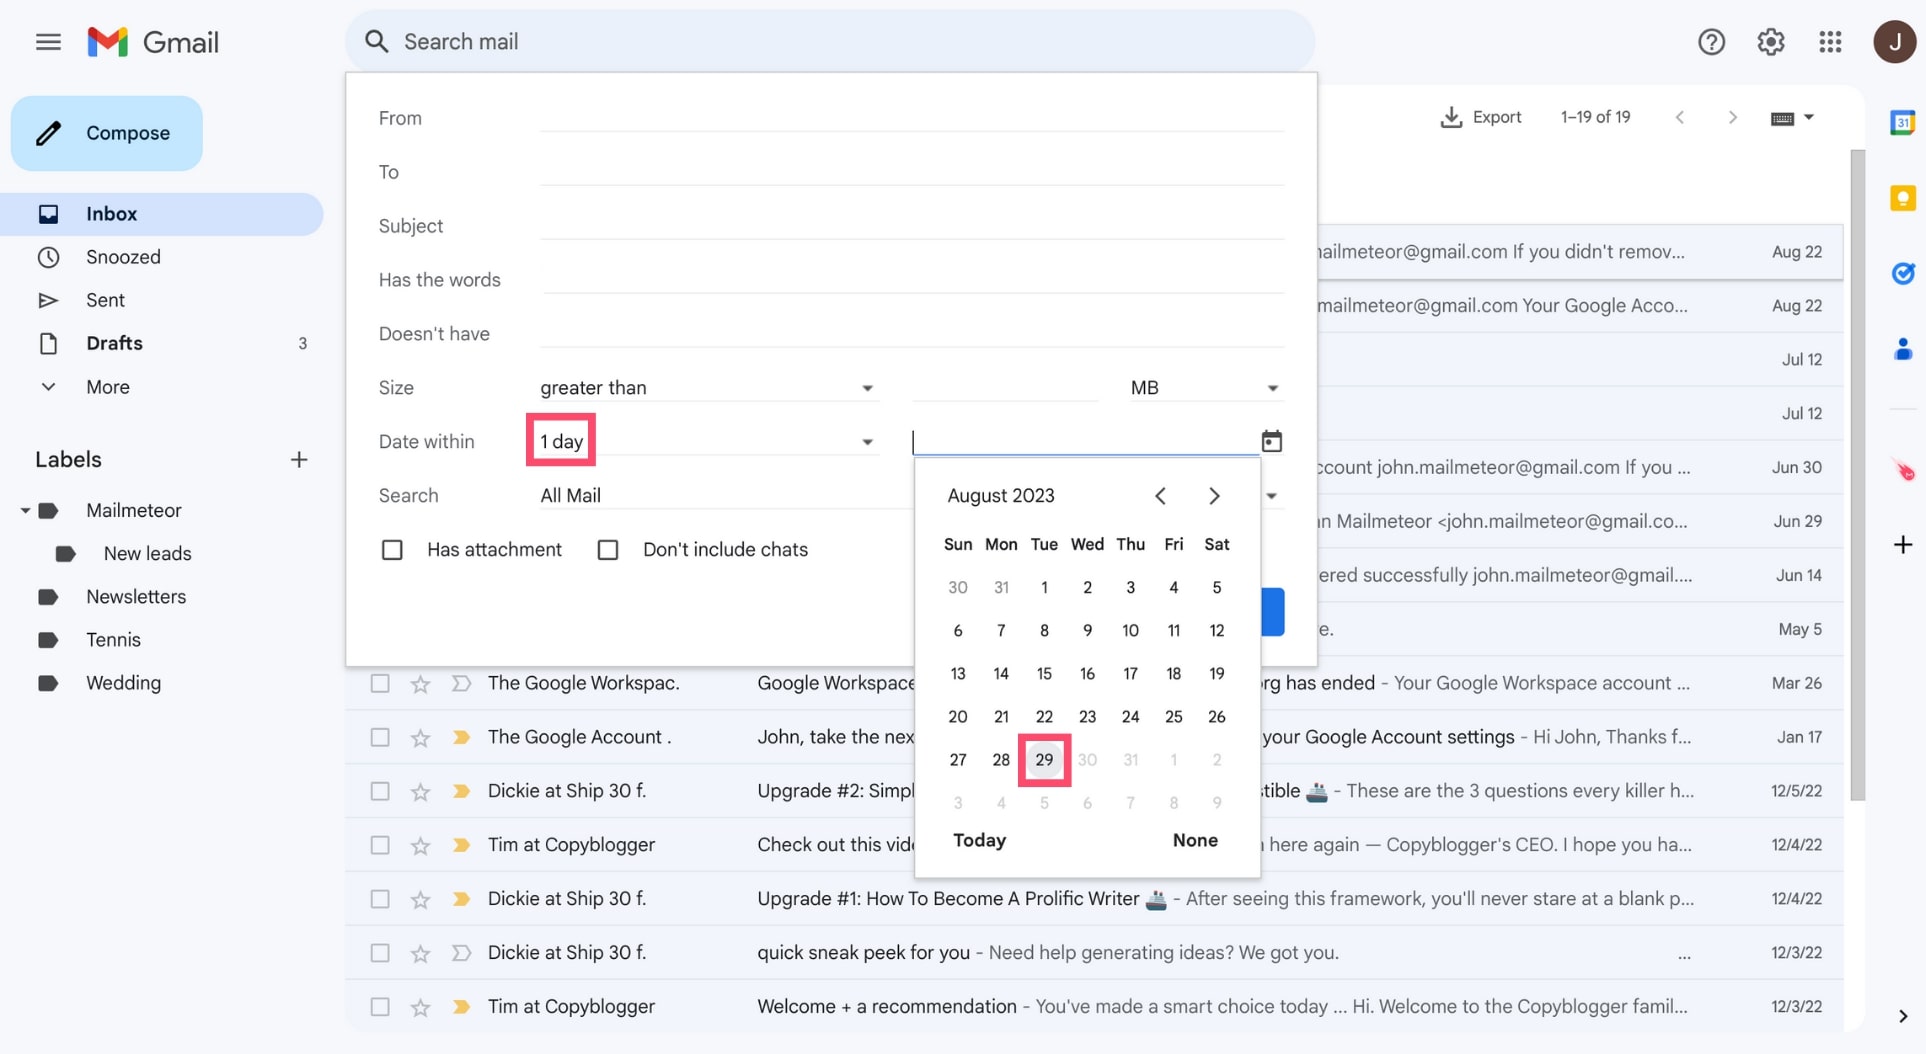 The Gmail "Date within" filter